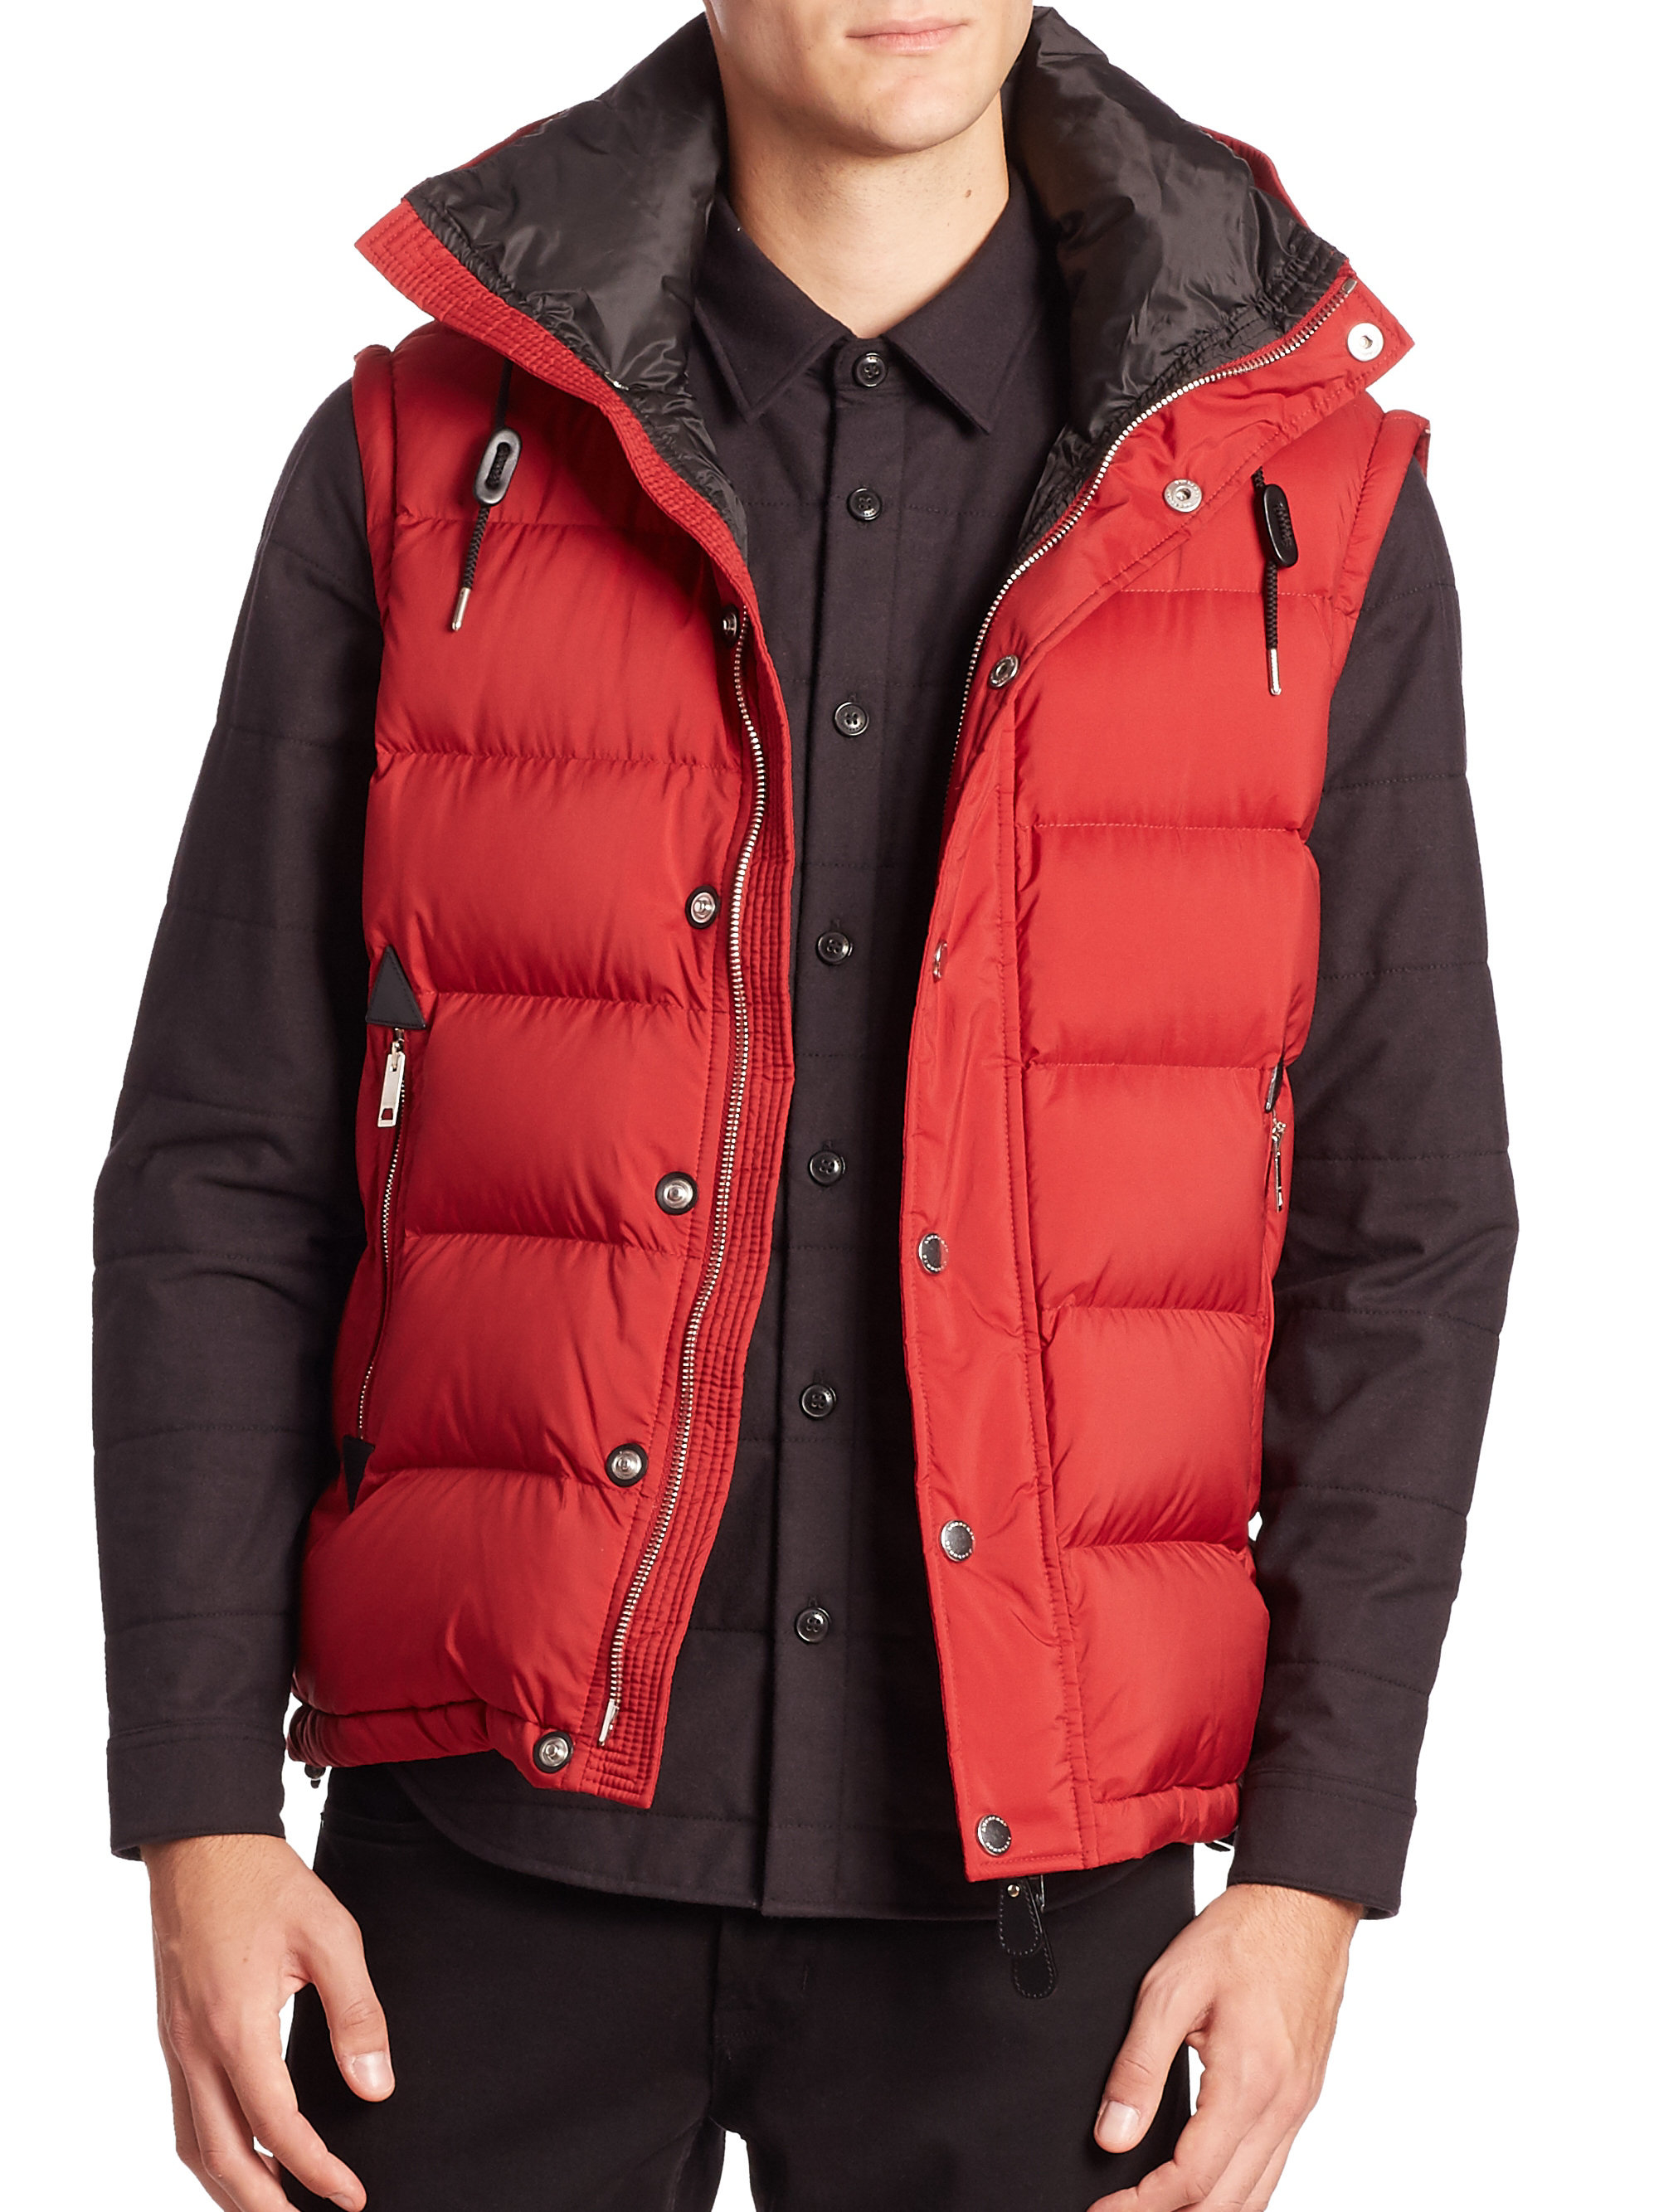 Burberry Down-filled Detachable Sleeve Hooded Jacket in Red for Men - Lyst